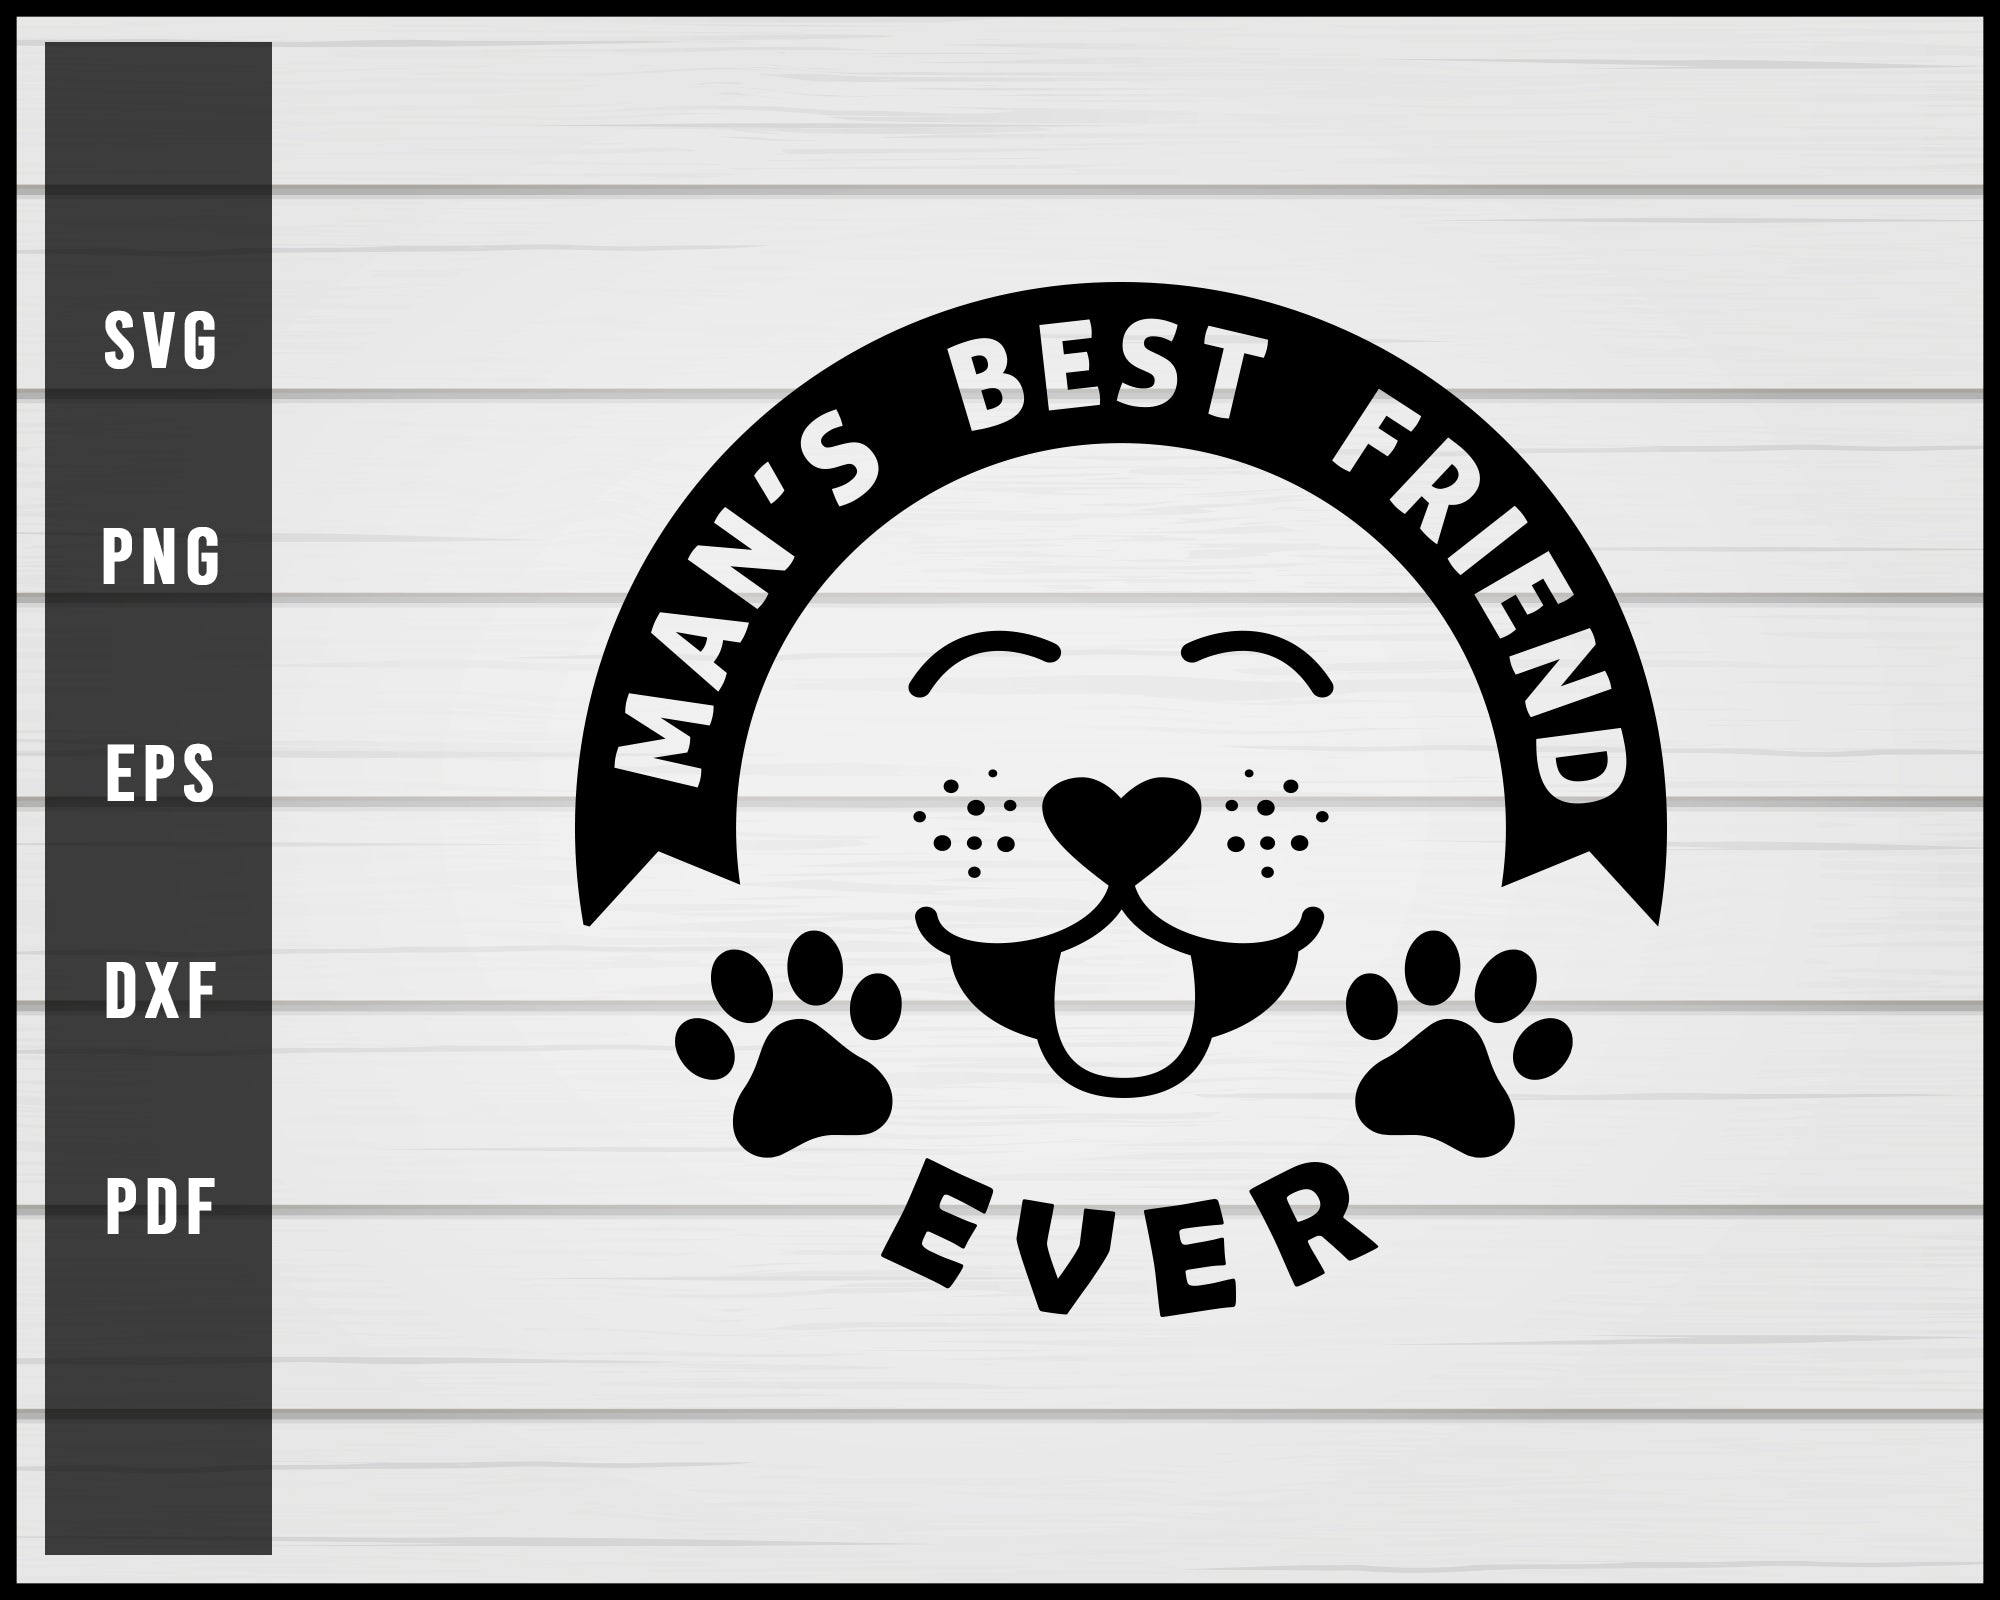 Man's Best Friend Is Dog Ever svg png Silhouette Designs For Cricut And Printable Files